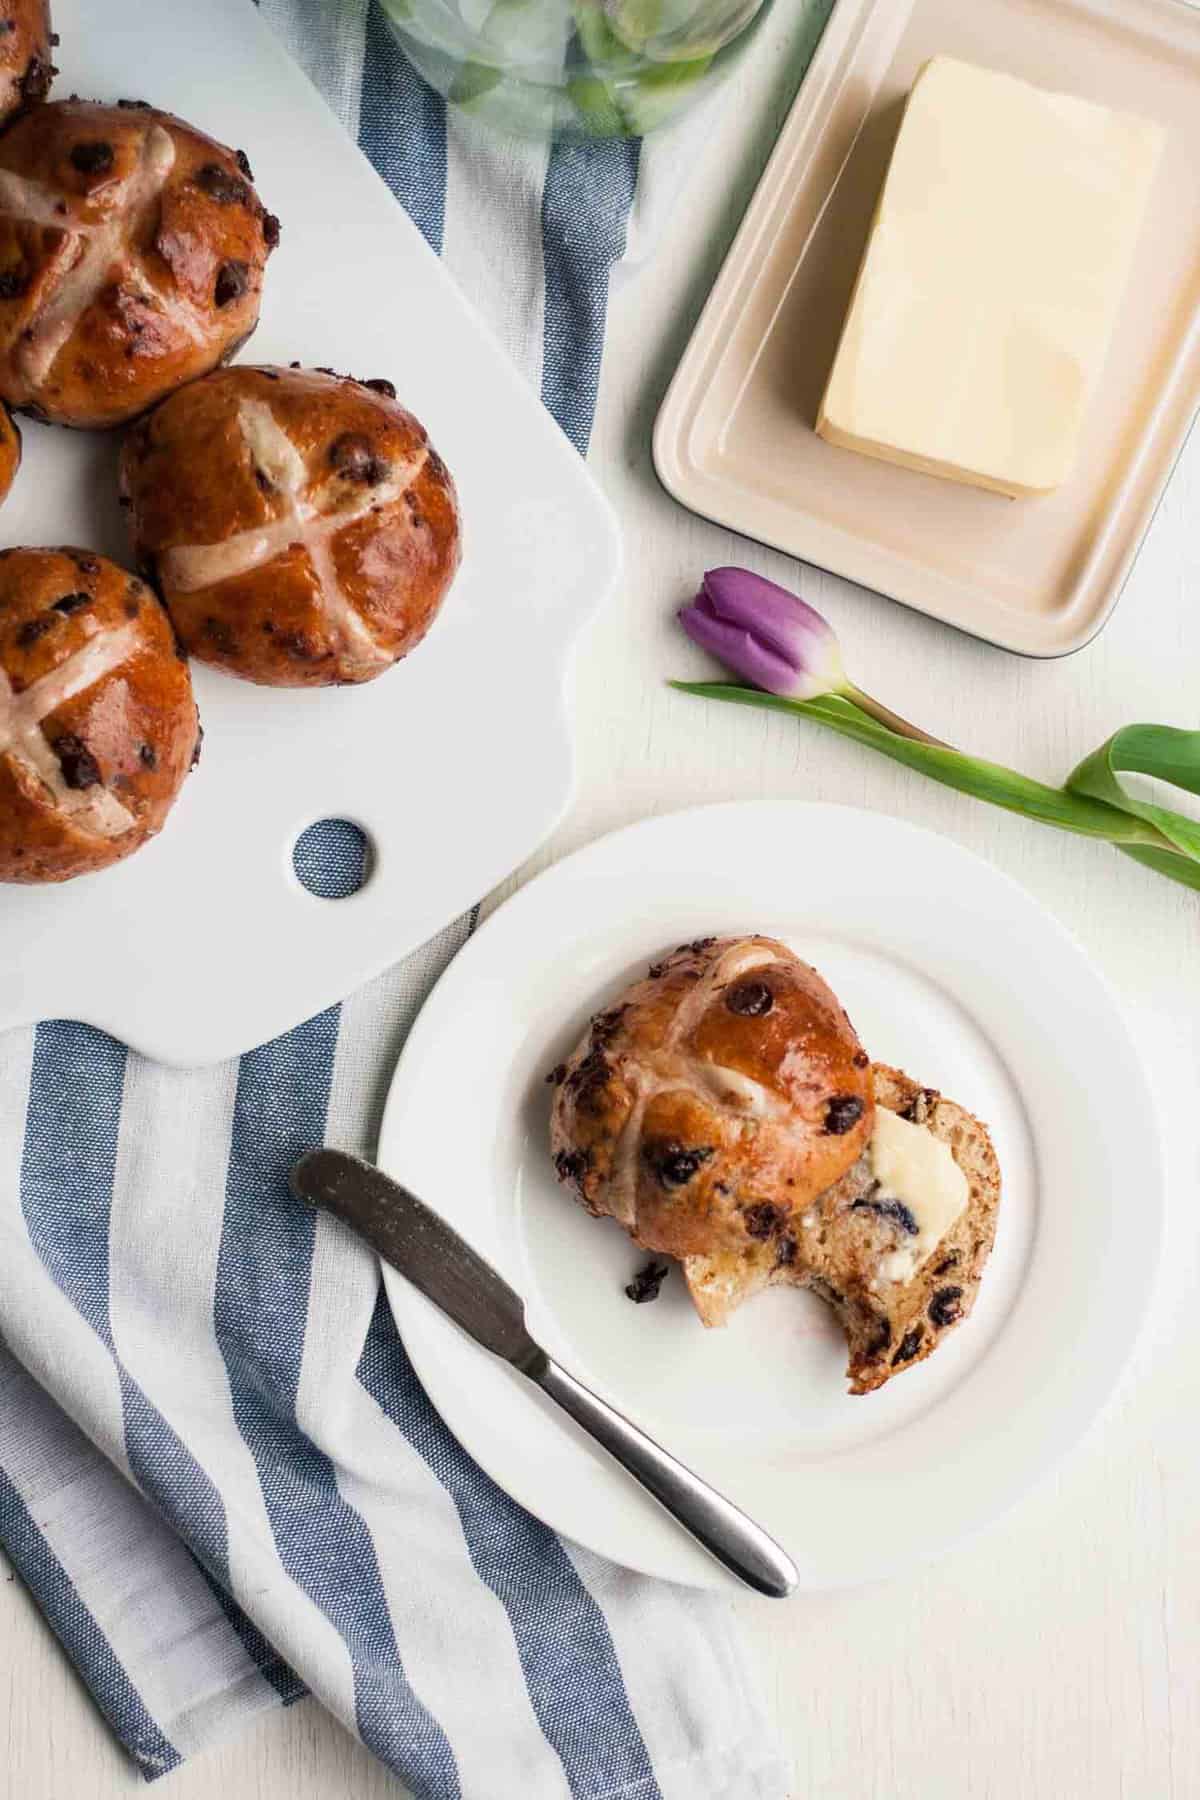 Chocolate Cherry Hot Cross Buns - these richly spiced and pillowy soft hot cross buns are filled with chocolate chips and dried cherries and are the perfect Easter treat! | eatloveeats.com